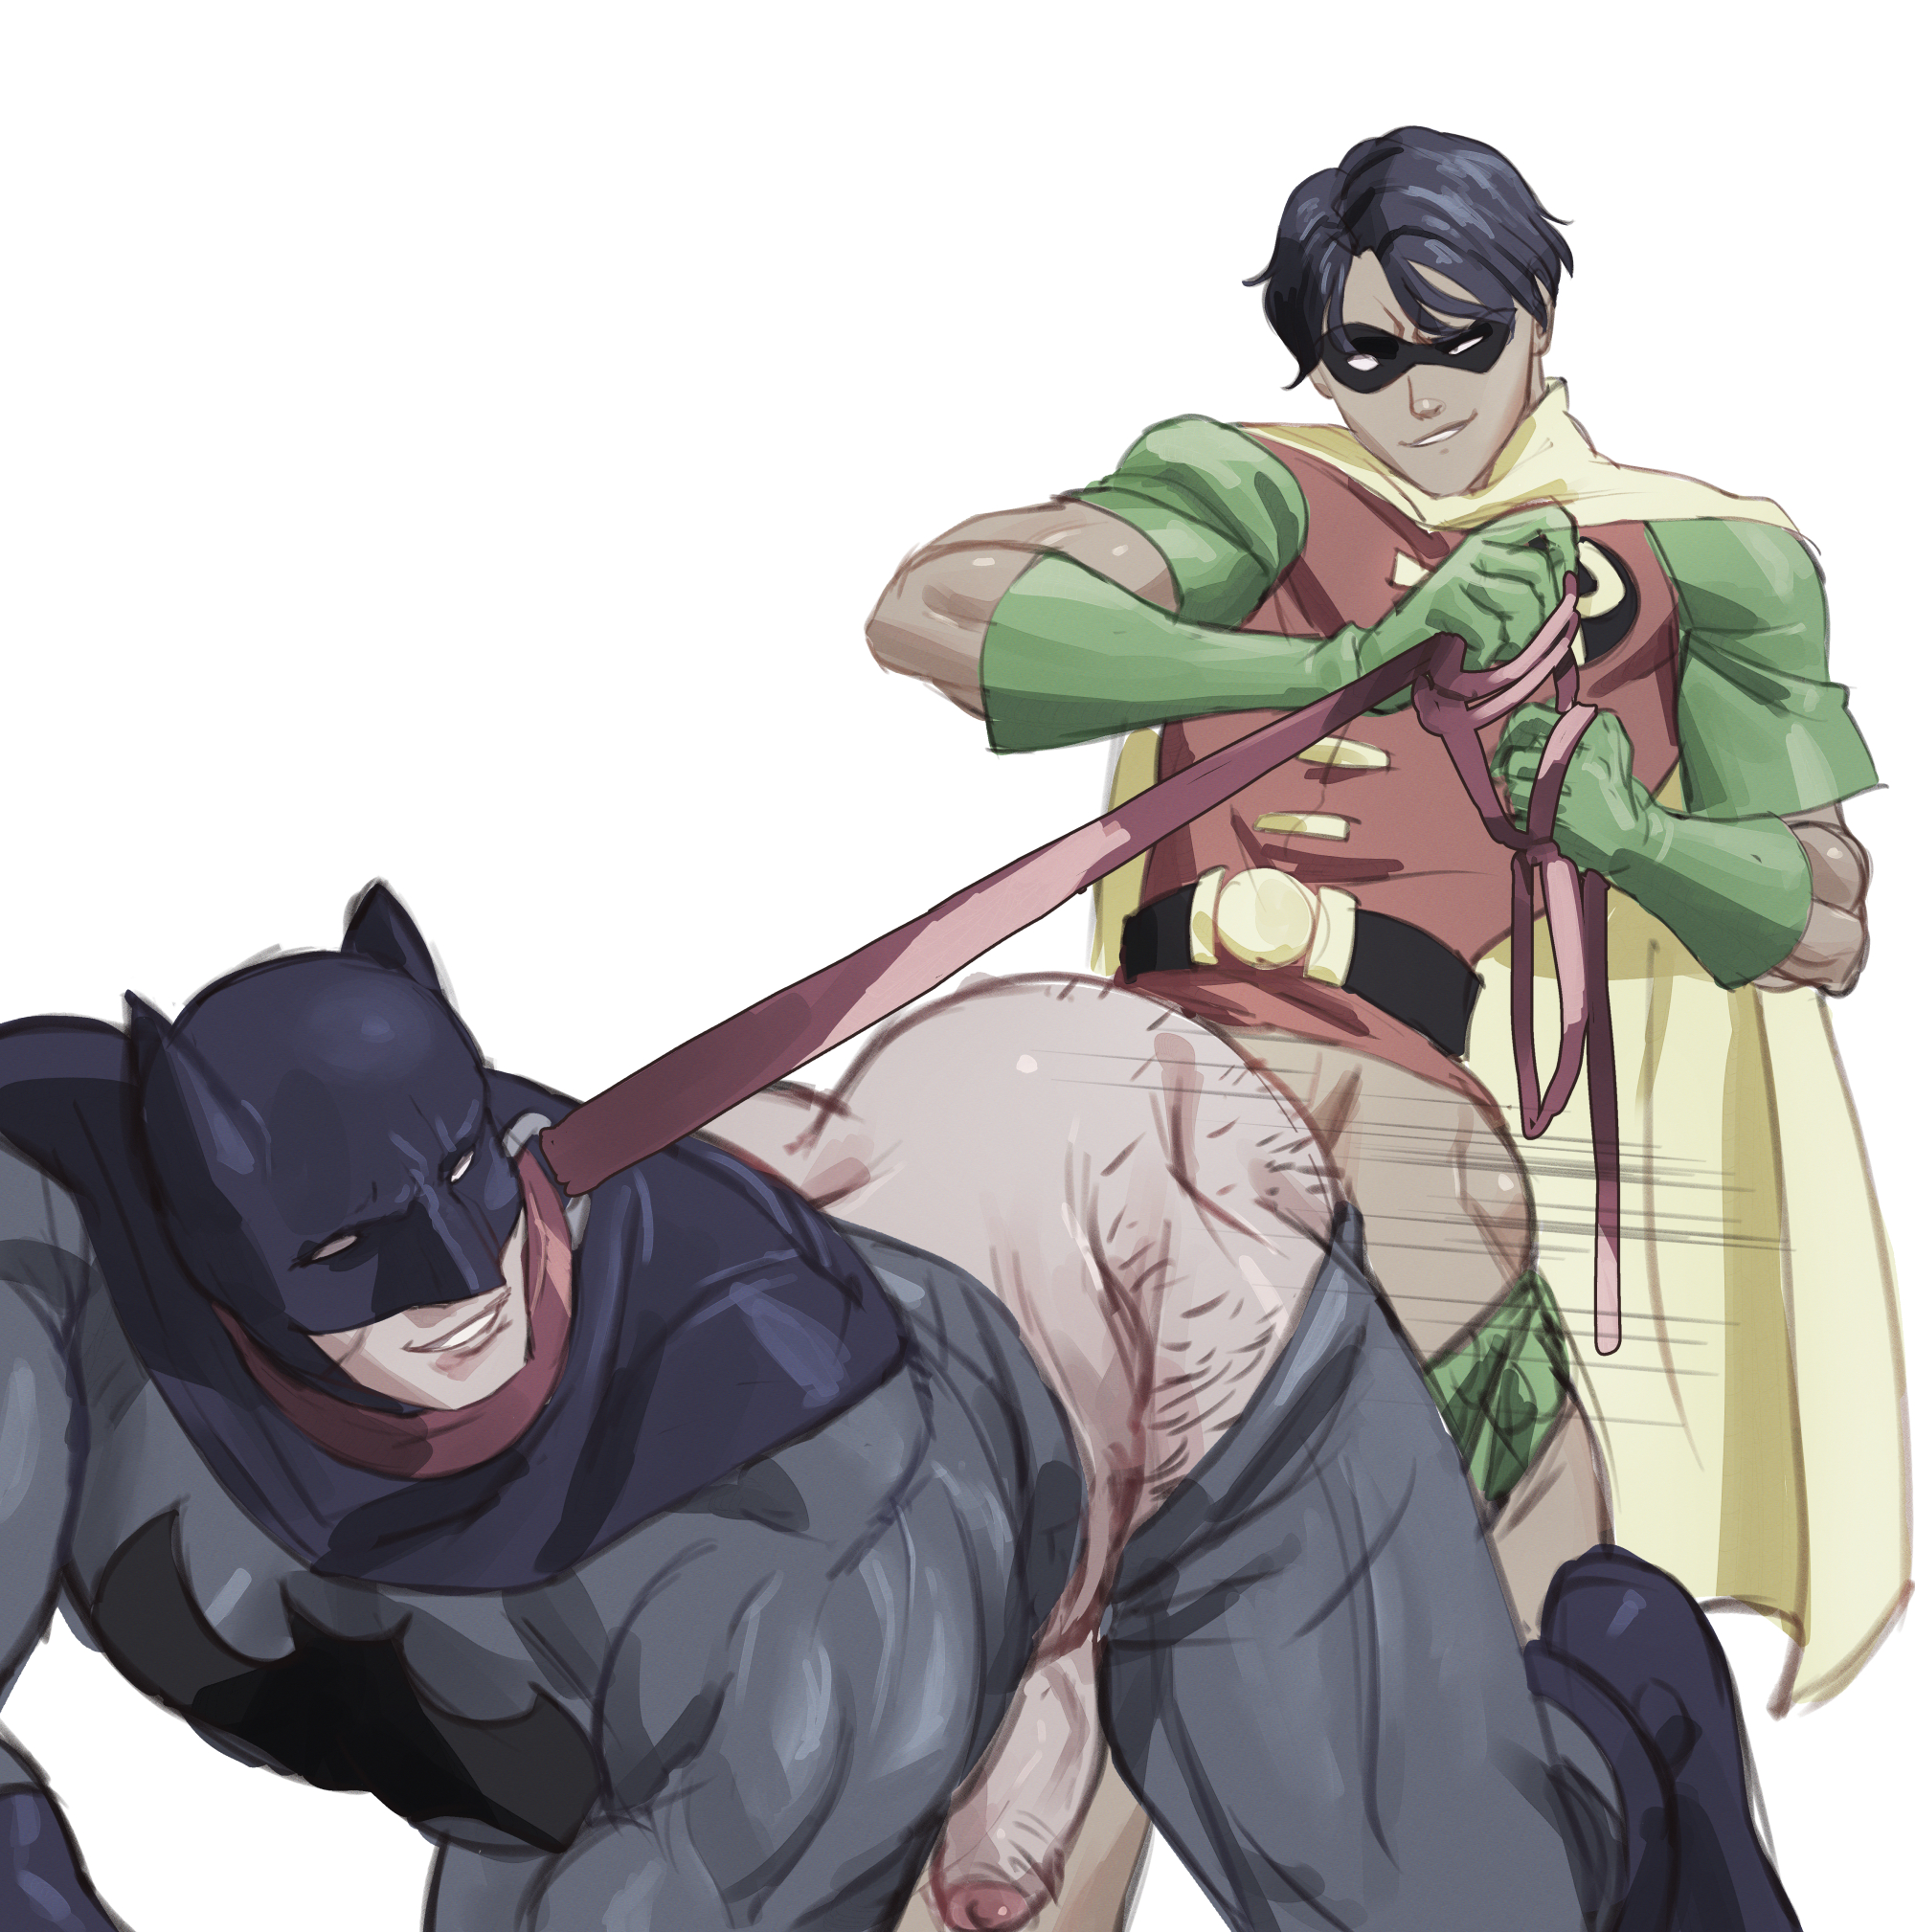 Dick Grayson Porn - Dick Grayson Art Dump, mostly NSFW - Chapter 5 - sarriathmg - Nightwing  (Comics) [Archive of Our Own]